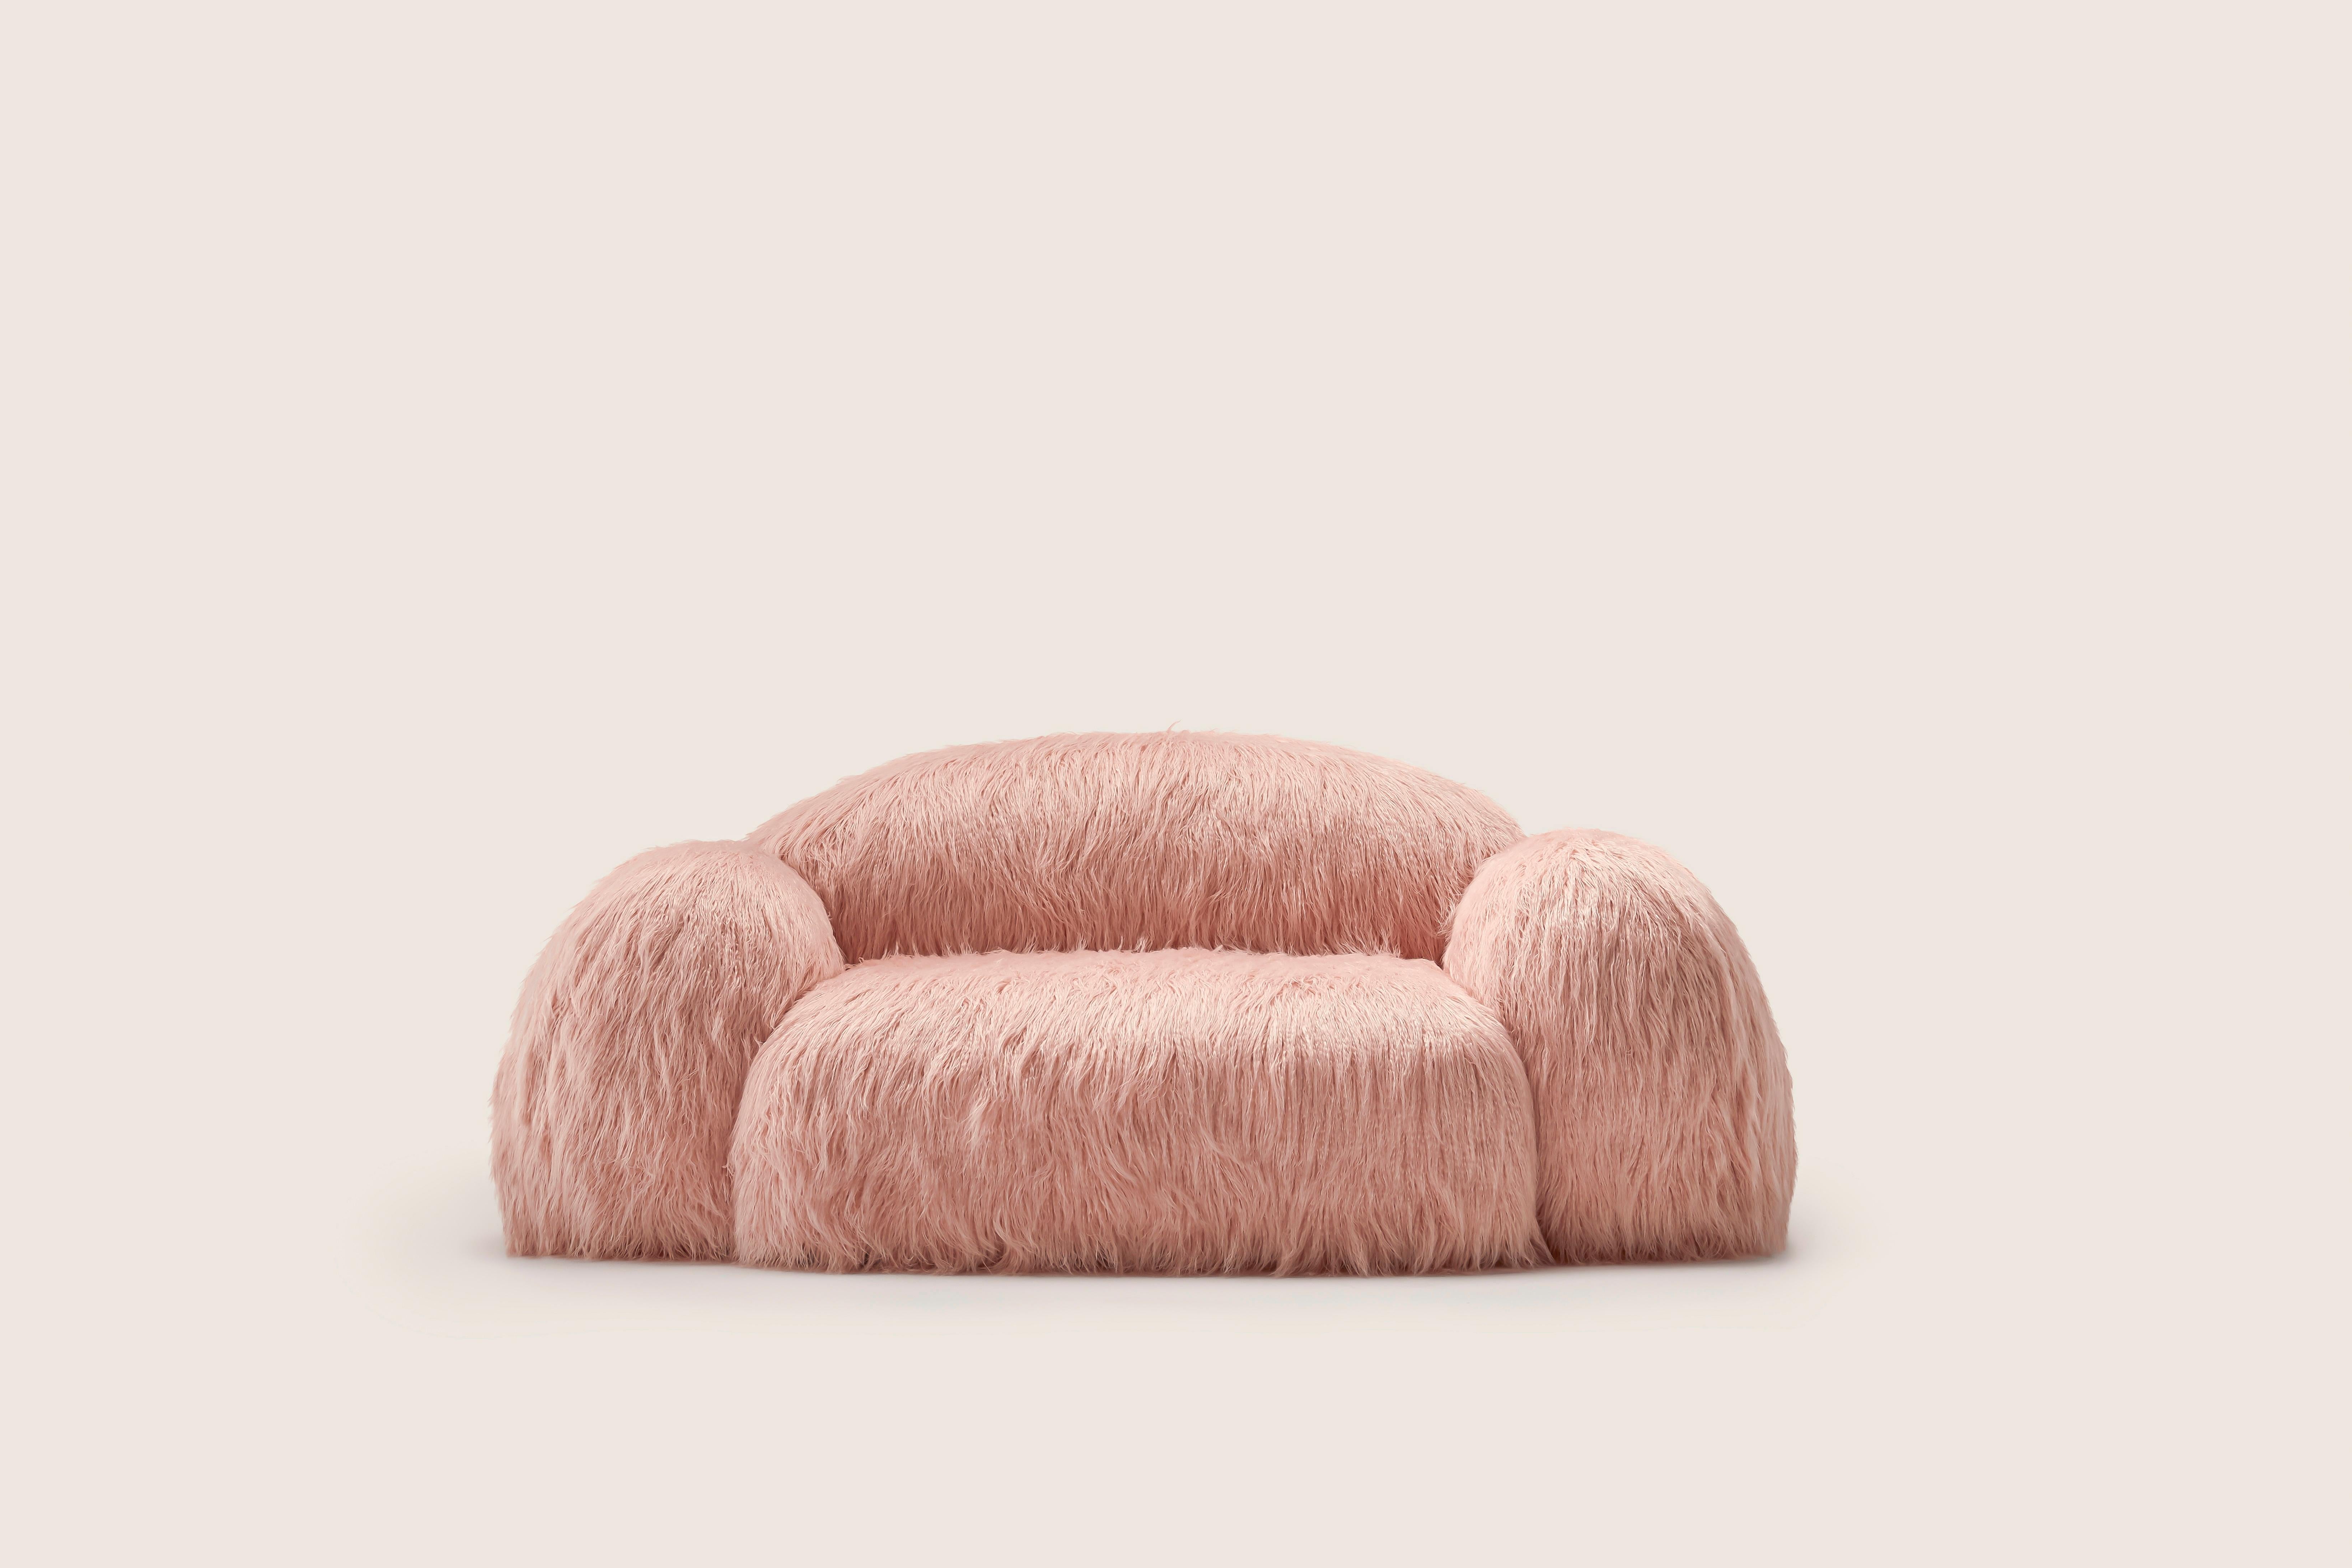 Yeti Sofa by Pepe Albargues
by Vladimir Naumov
Dimensions: W 202 x D 110 x H 82 cm.
Materials: Mongolia fur, pine wood structure, plywood and tablex, foam cmhr (high resilence and flame retardant) sculpted beech wooden legs.
Also available in pink,